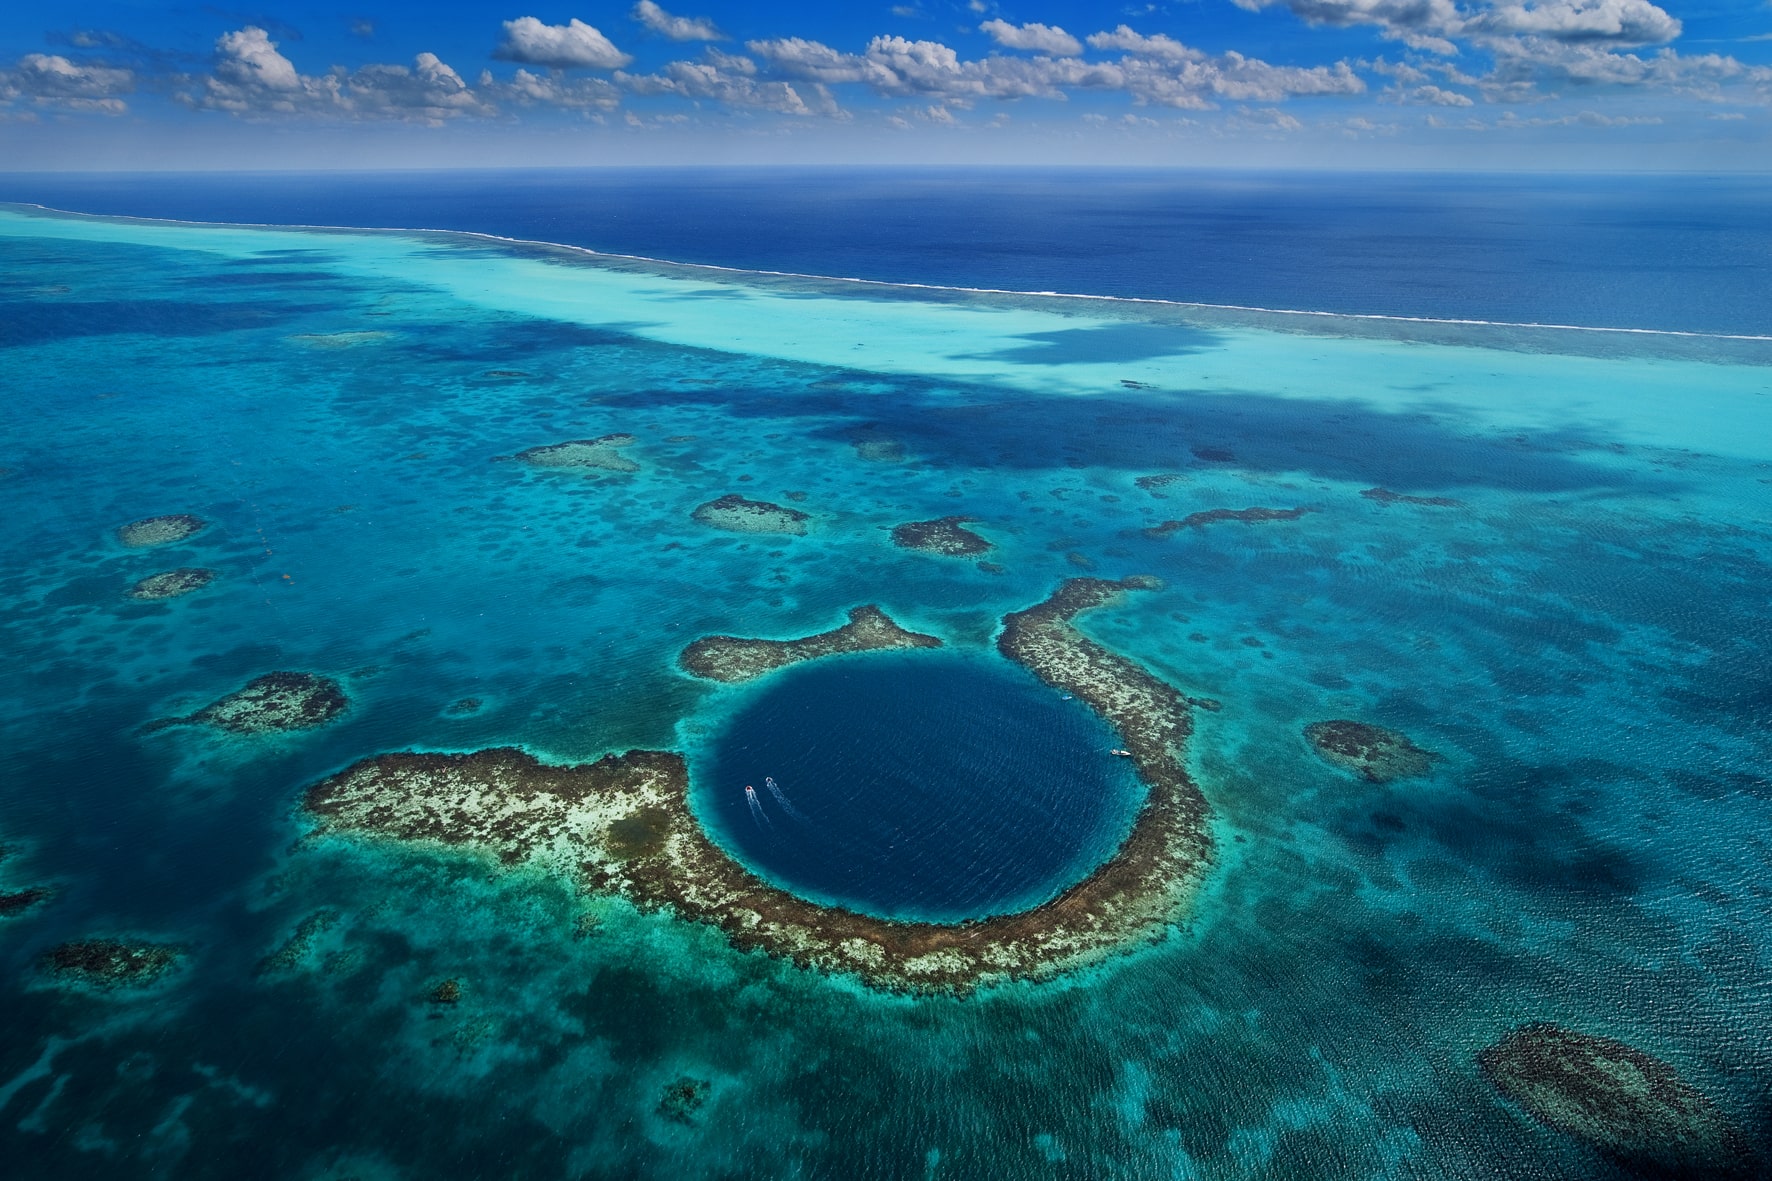 Great Blue Hole - The Largest Travel Guide in the World